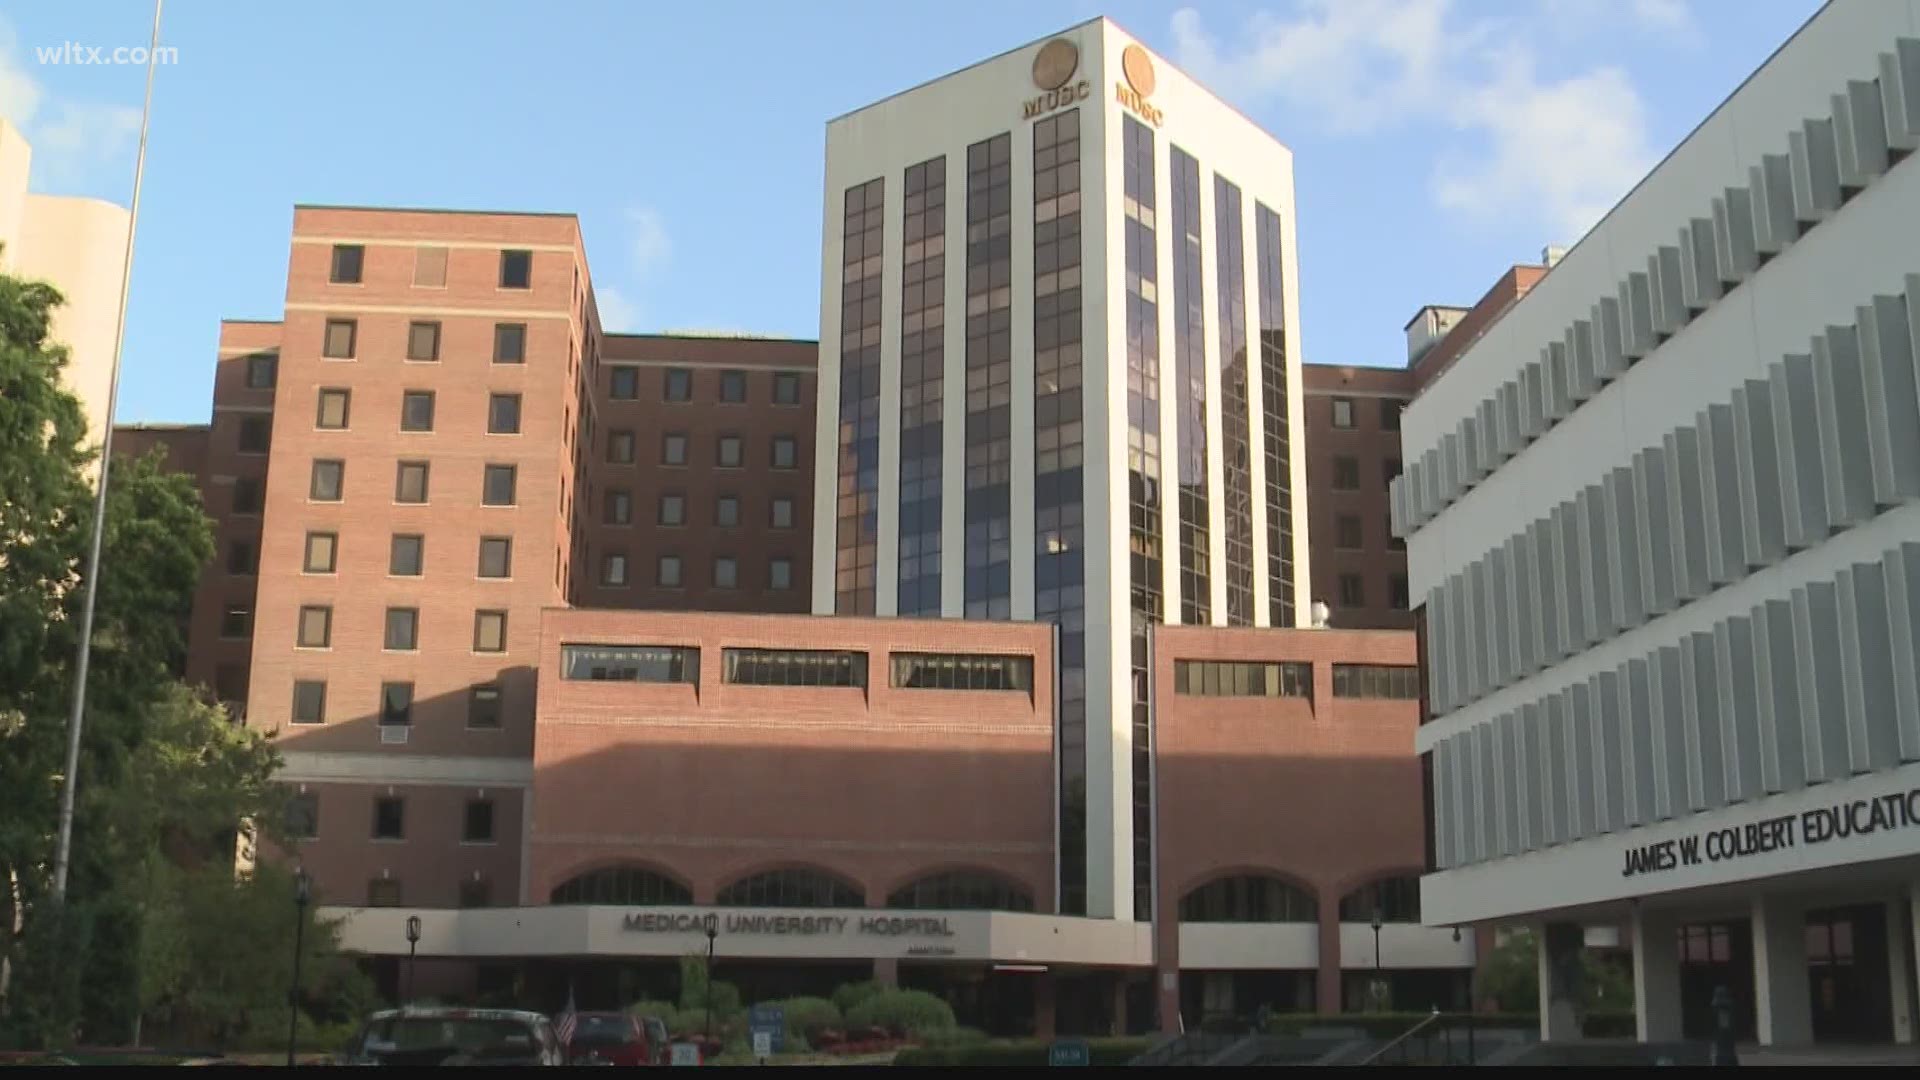 MUSC has had lab personnel absences and a strain on equipment because of COVID-19